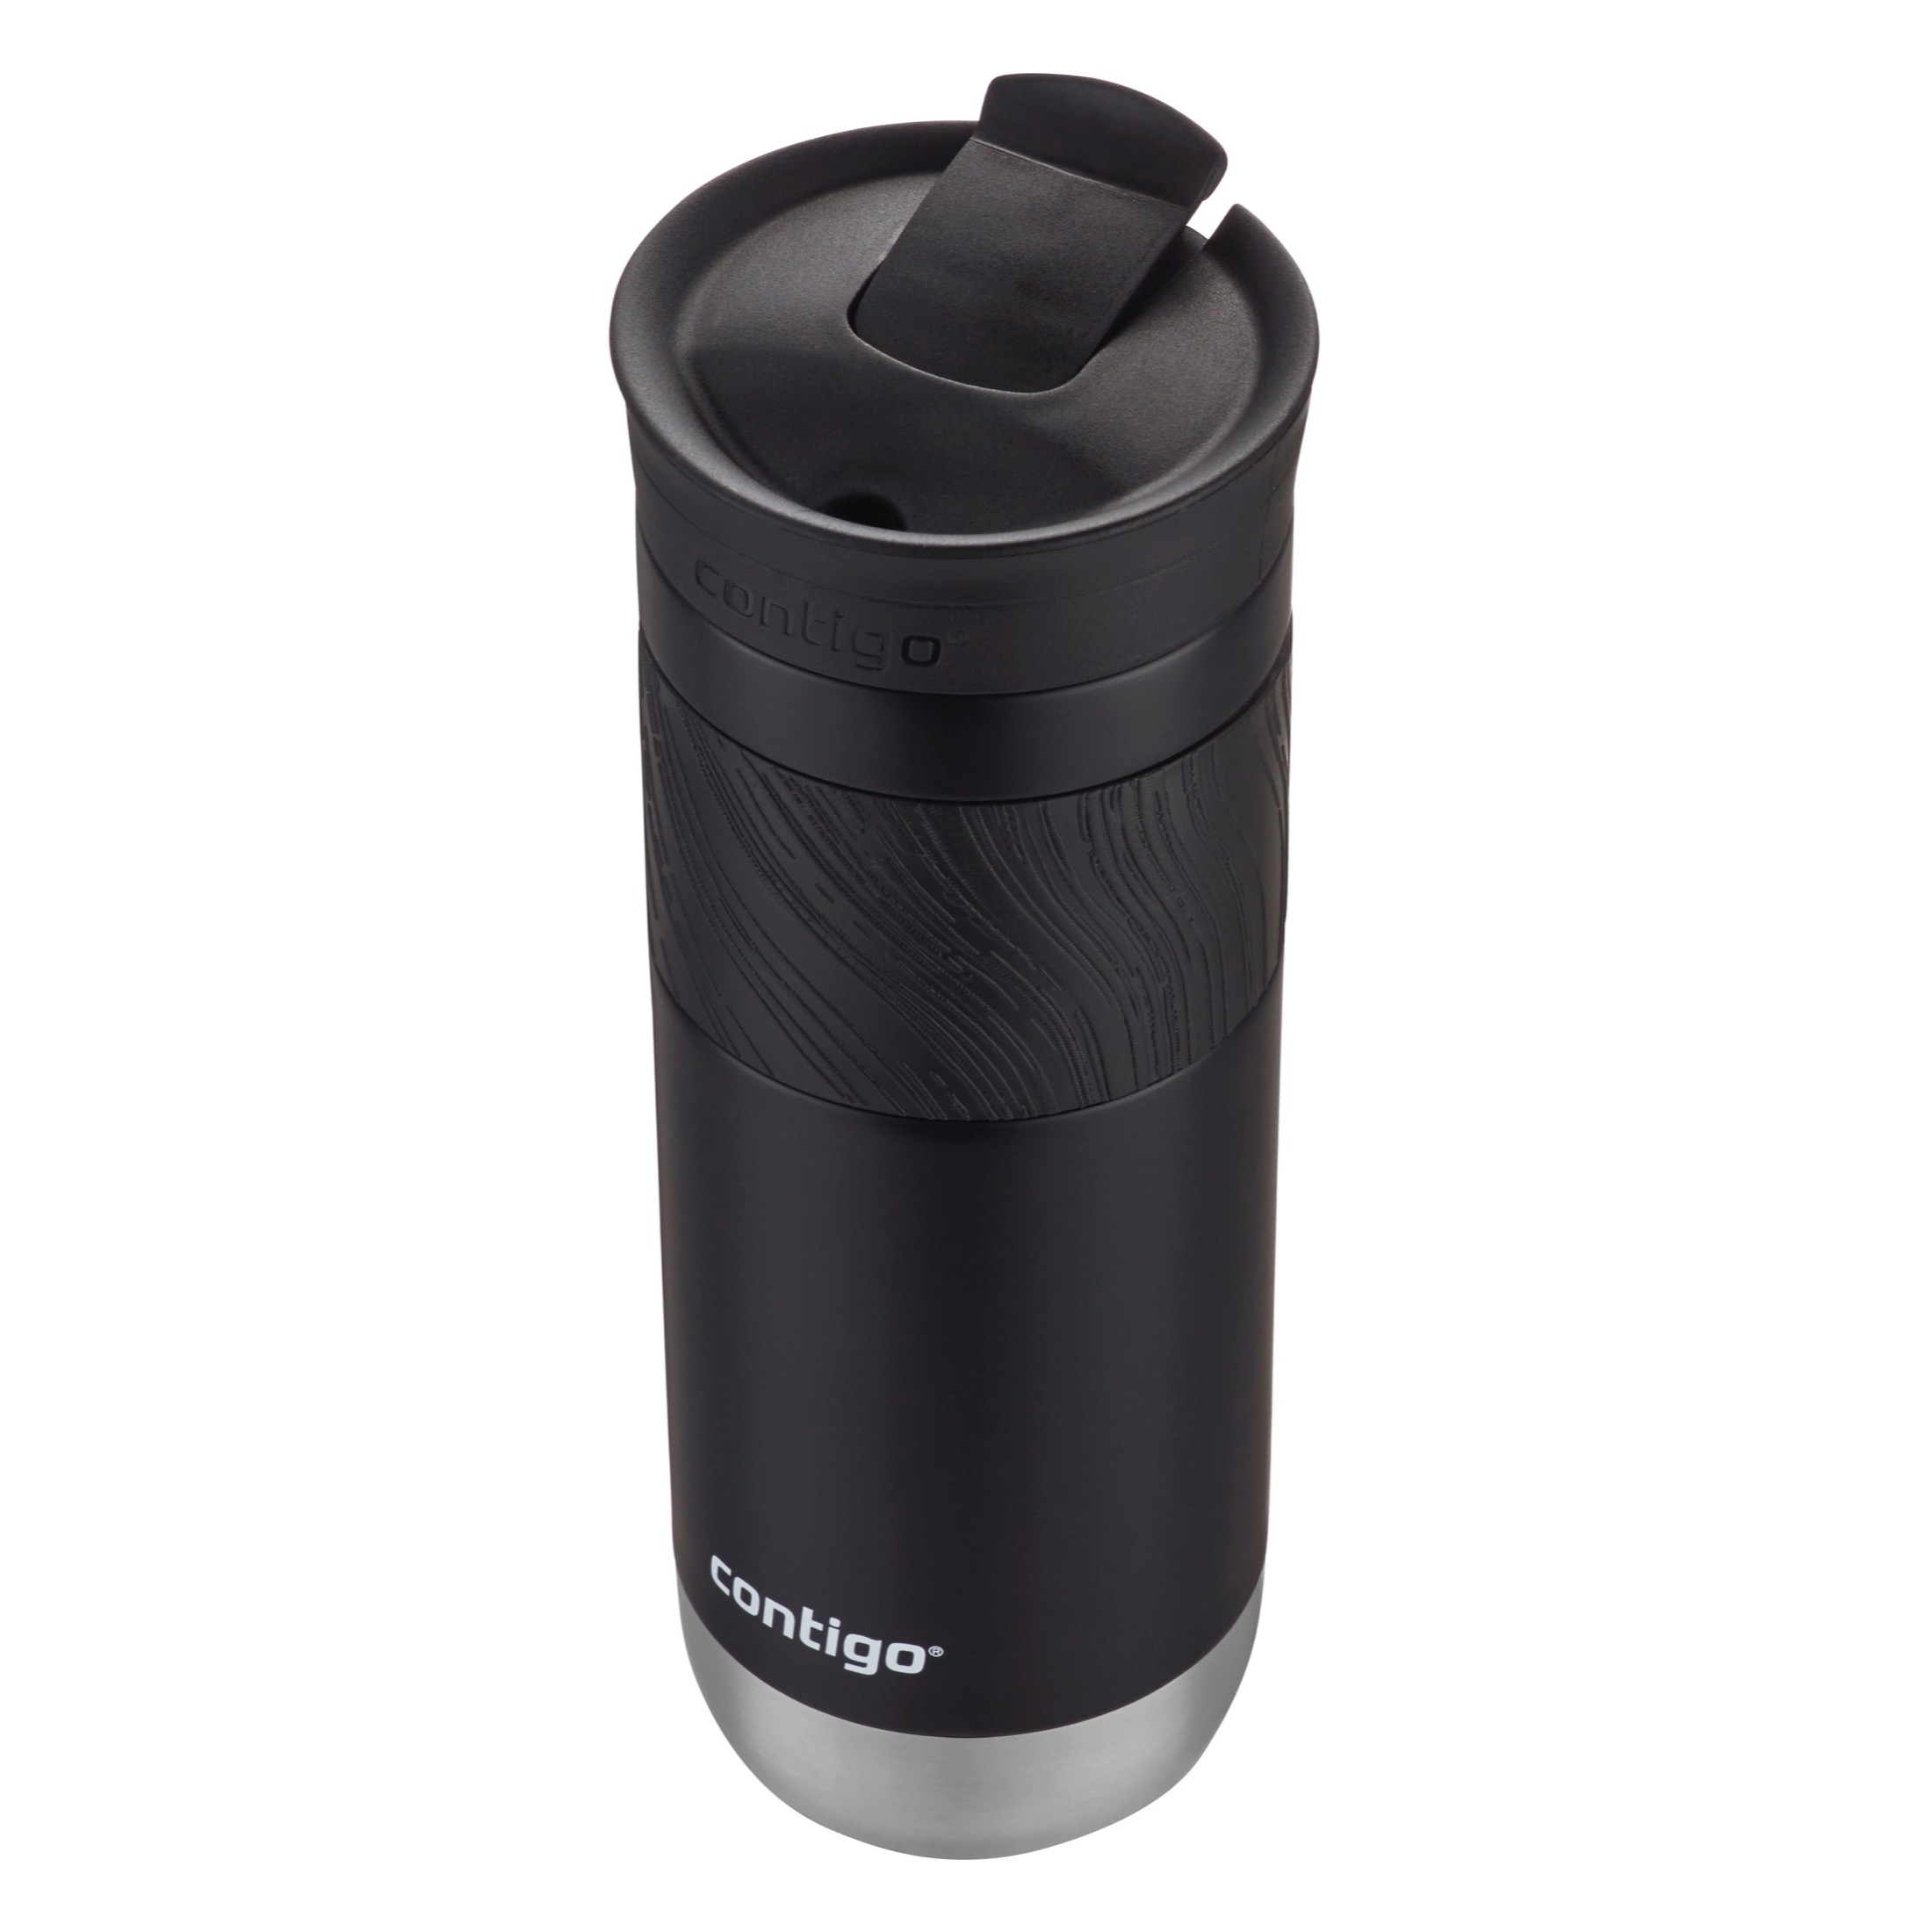 Contigo Byron 2.0 Stainless Steel Travel Mug with SNAPSEAL Lid in Black Licorice, 20 fl oz. - image 2 of 4